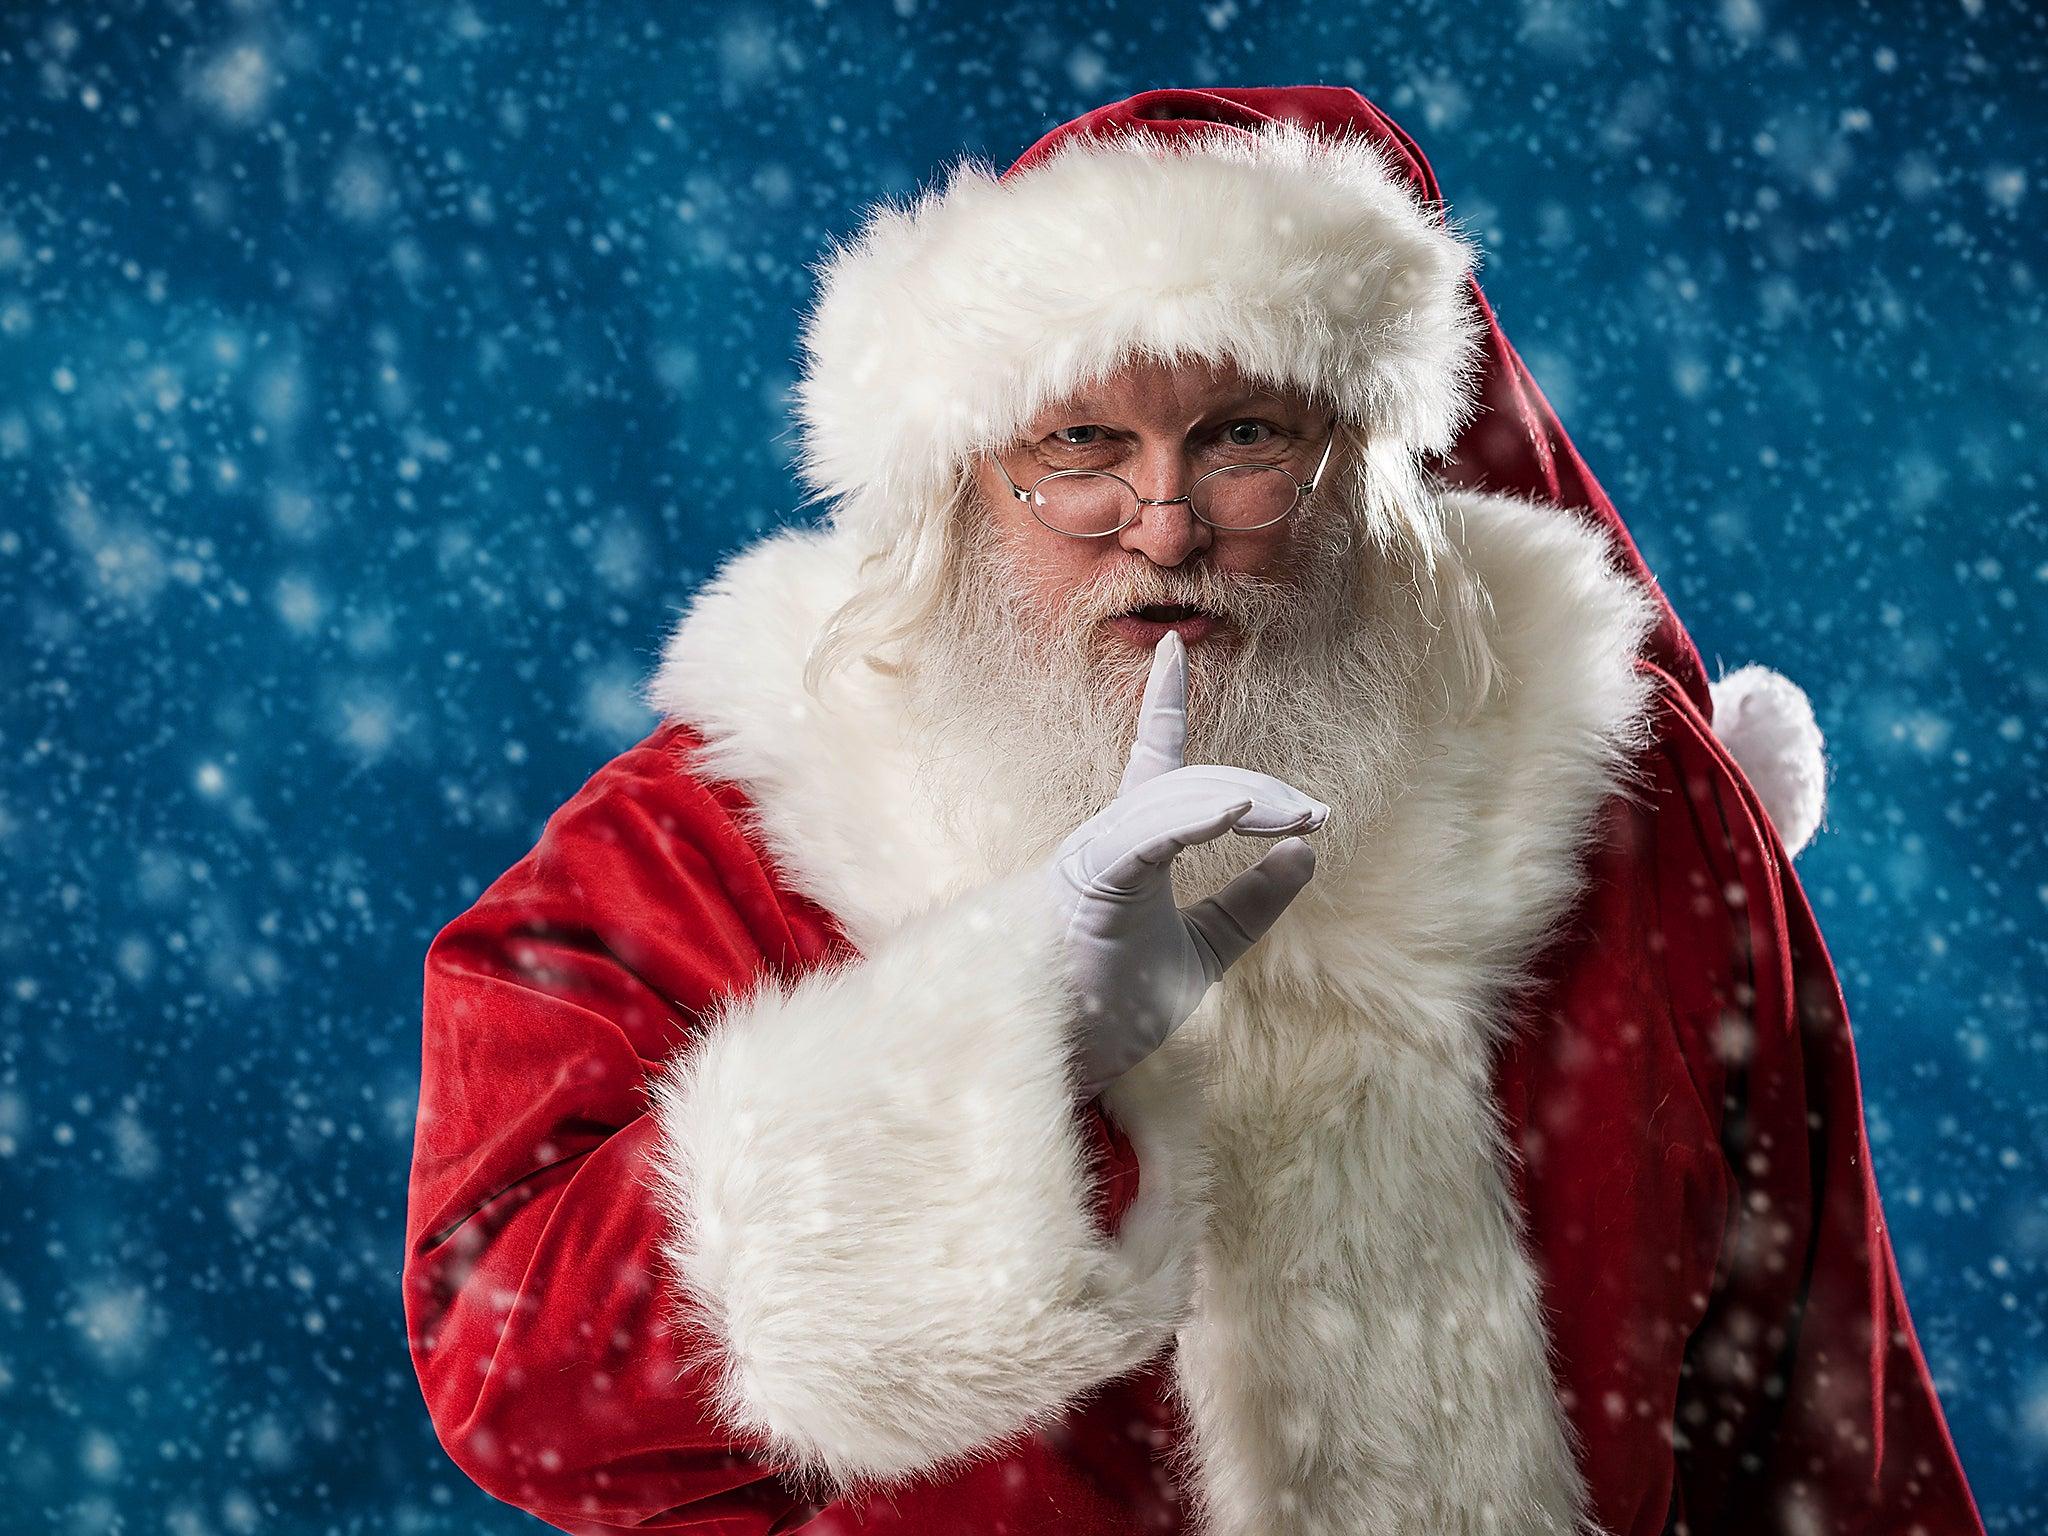 Don't tell children Father Christmas is real because lying